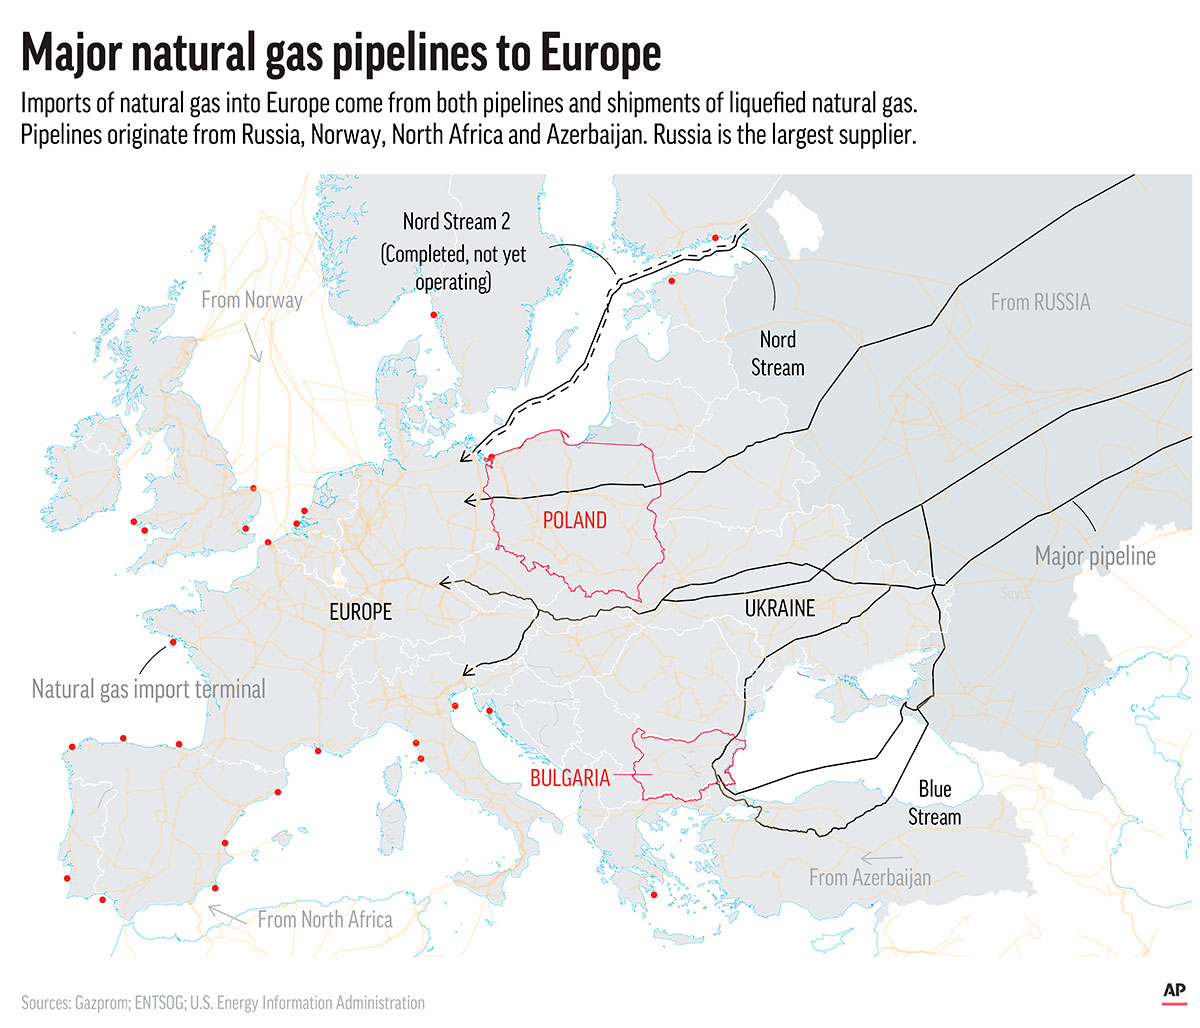 A map showing LNG terminals and pipelines in Europe.